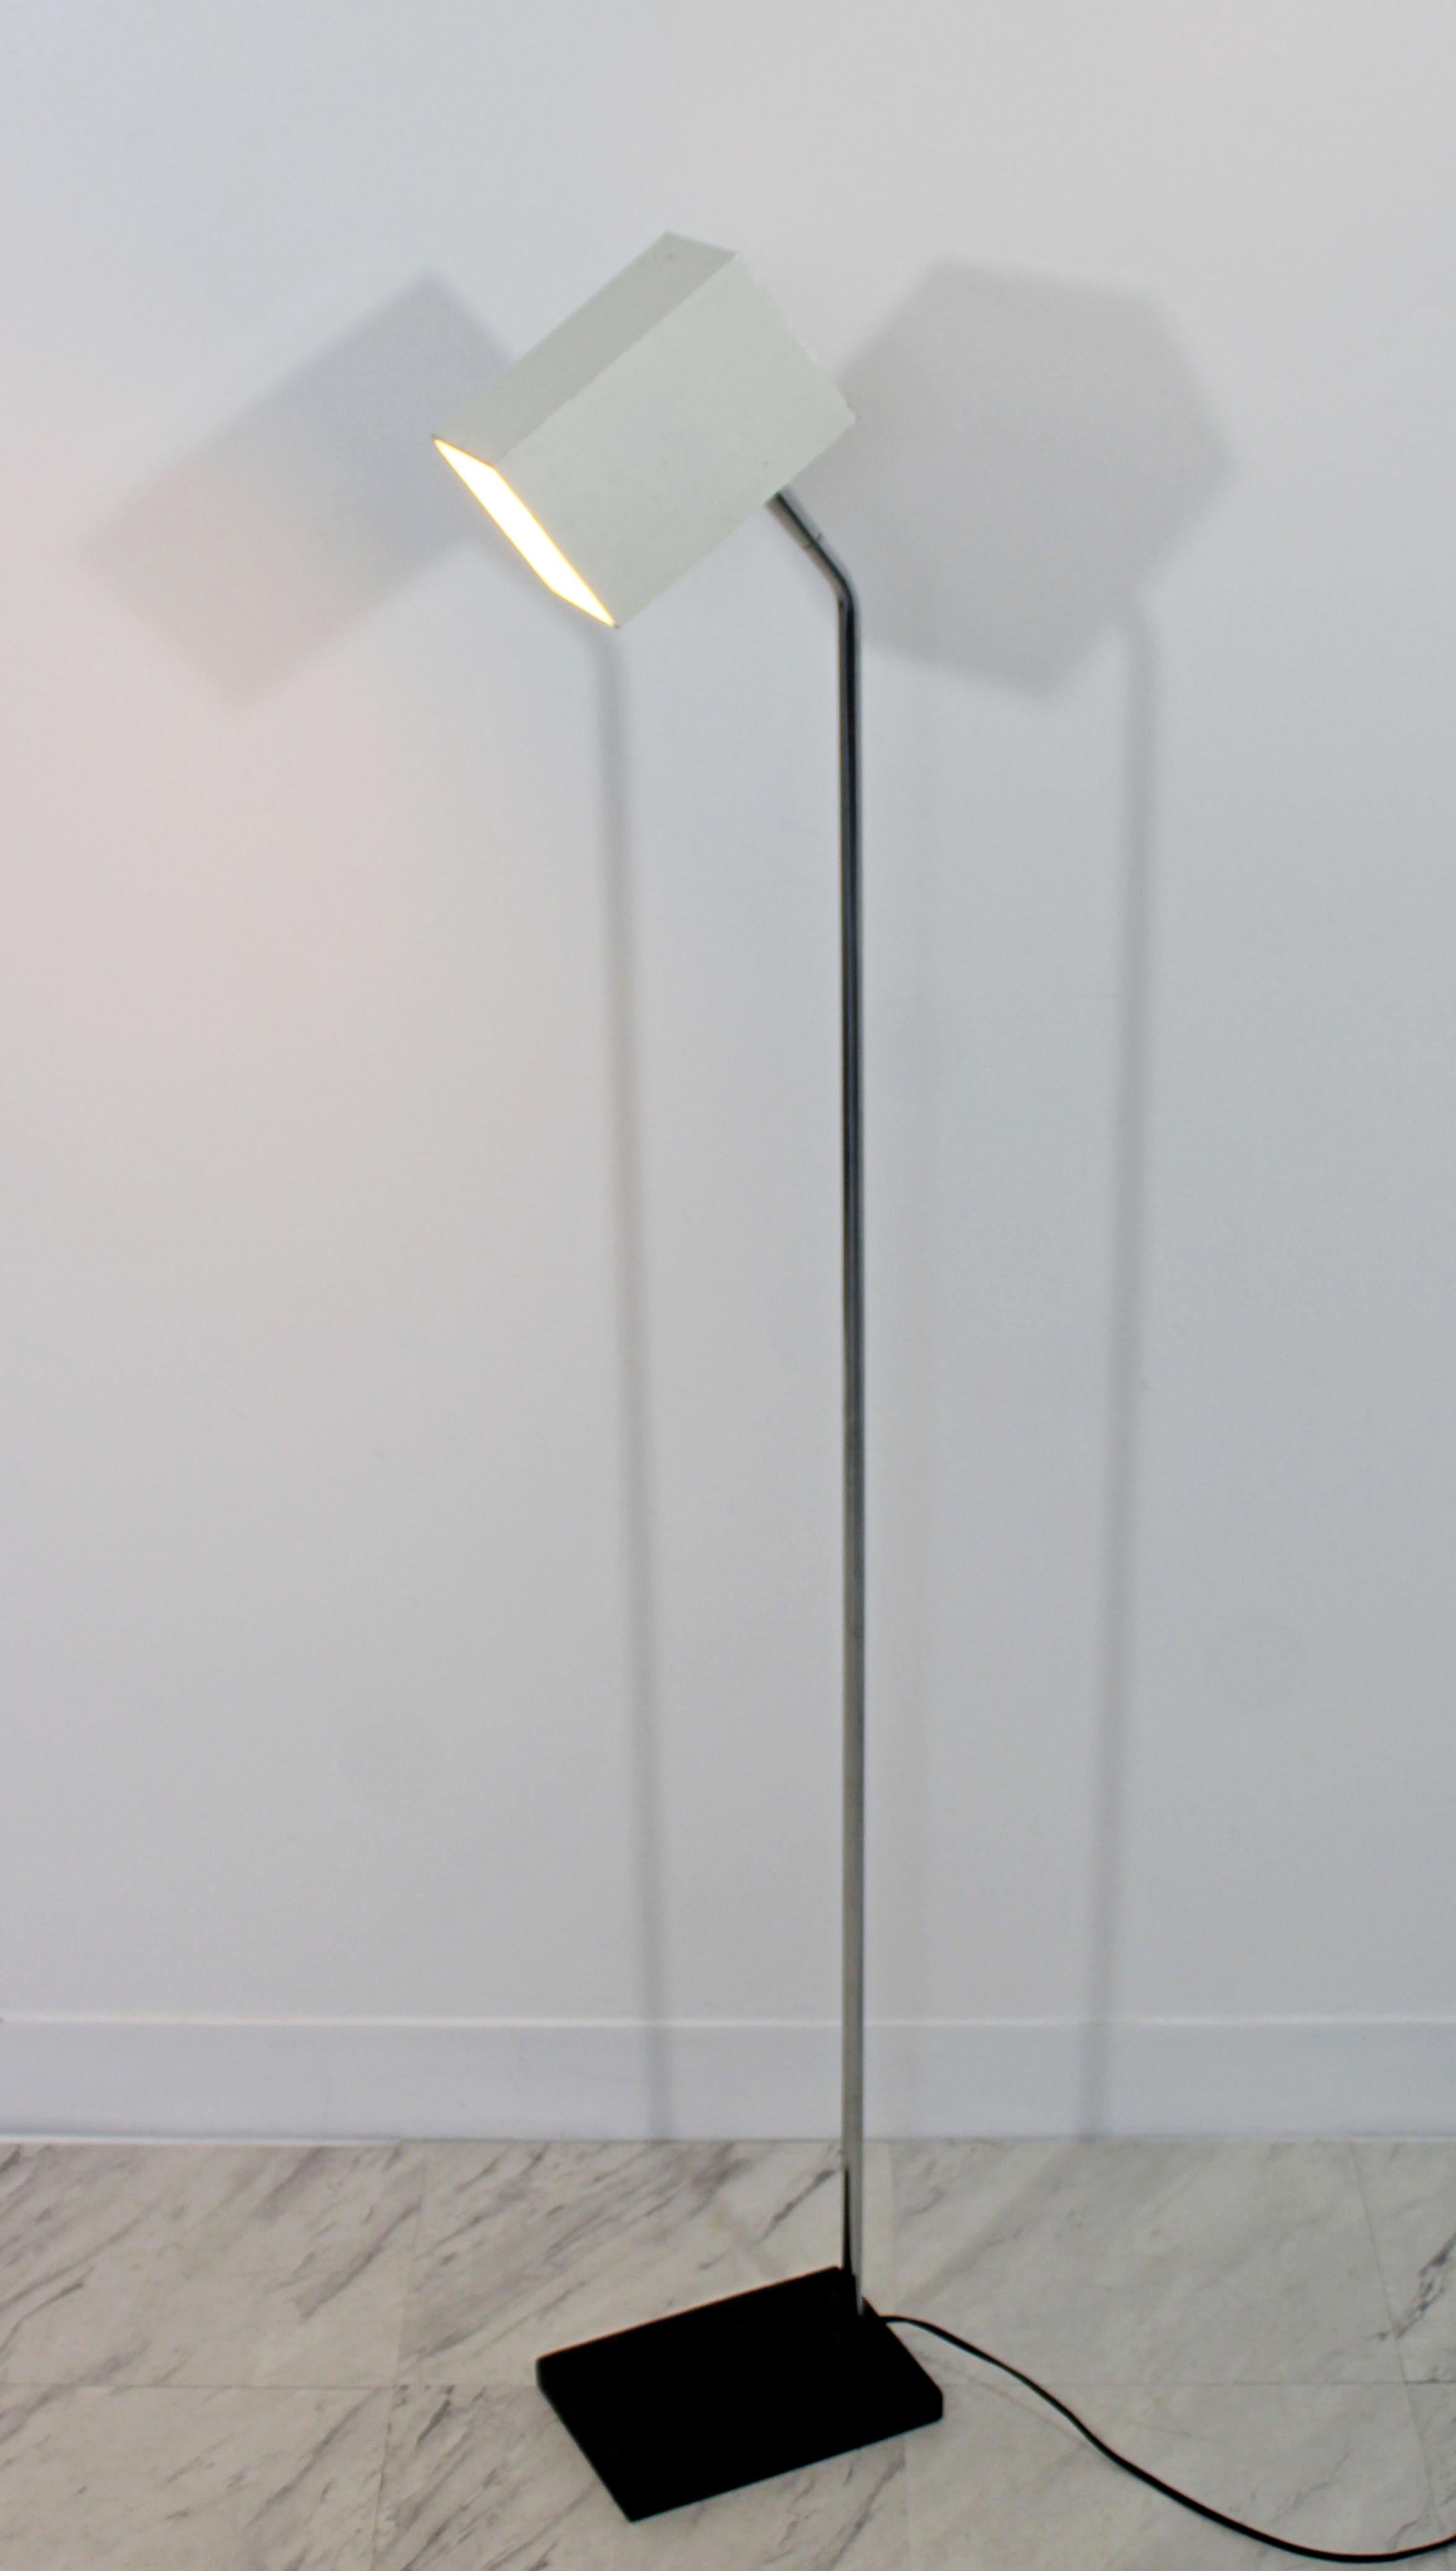 For your consideration is a fantastic, chrome floor lamp, with a white adjustable head, by Robert Sonneman, circa the 1970s. In very good condition. The dimensions are 8